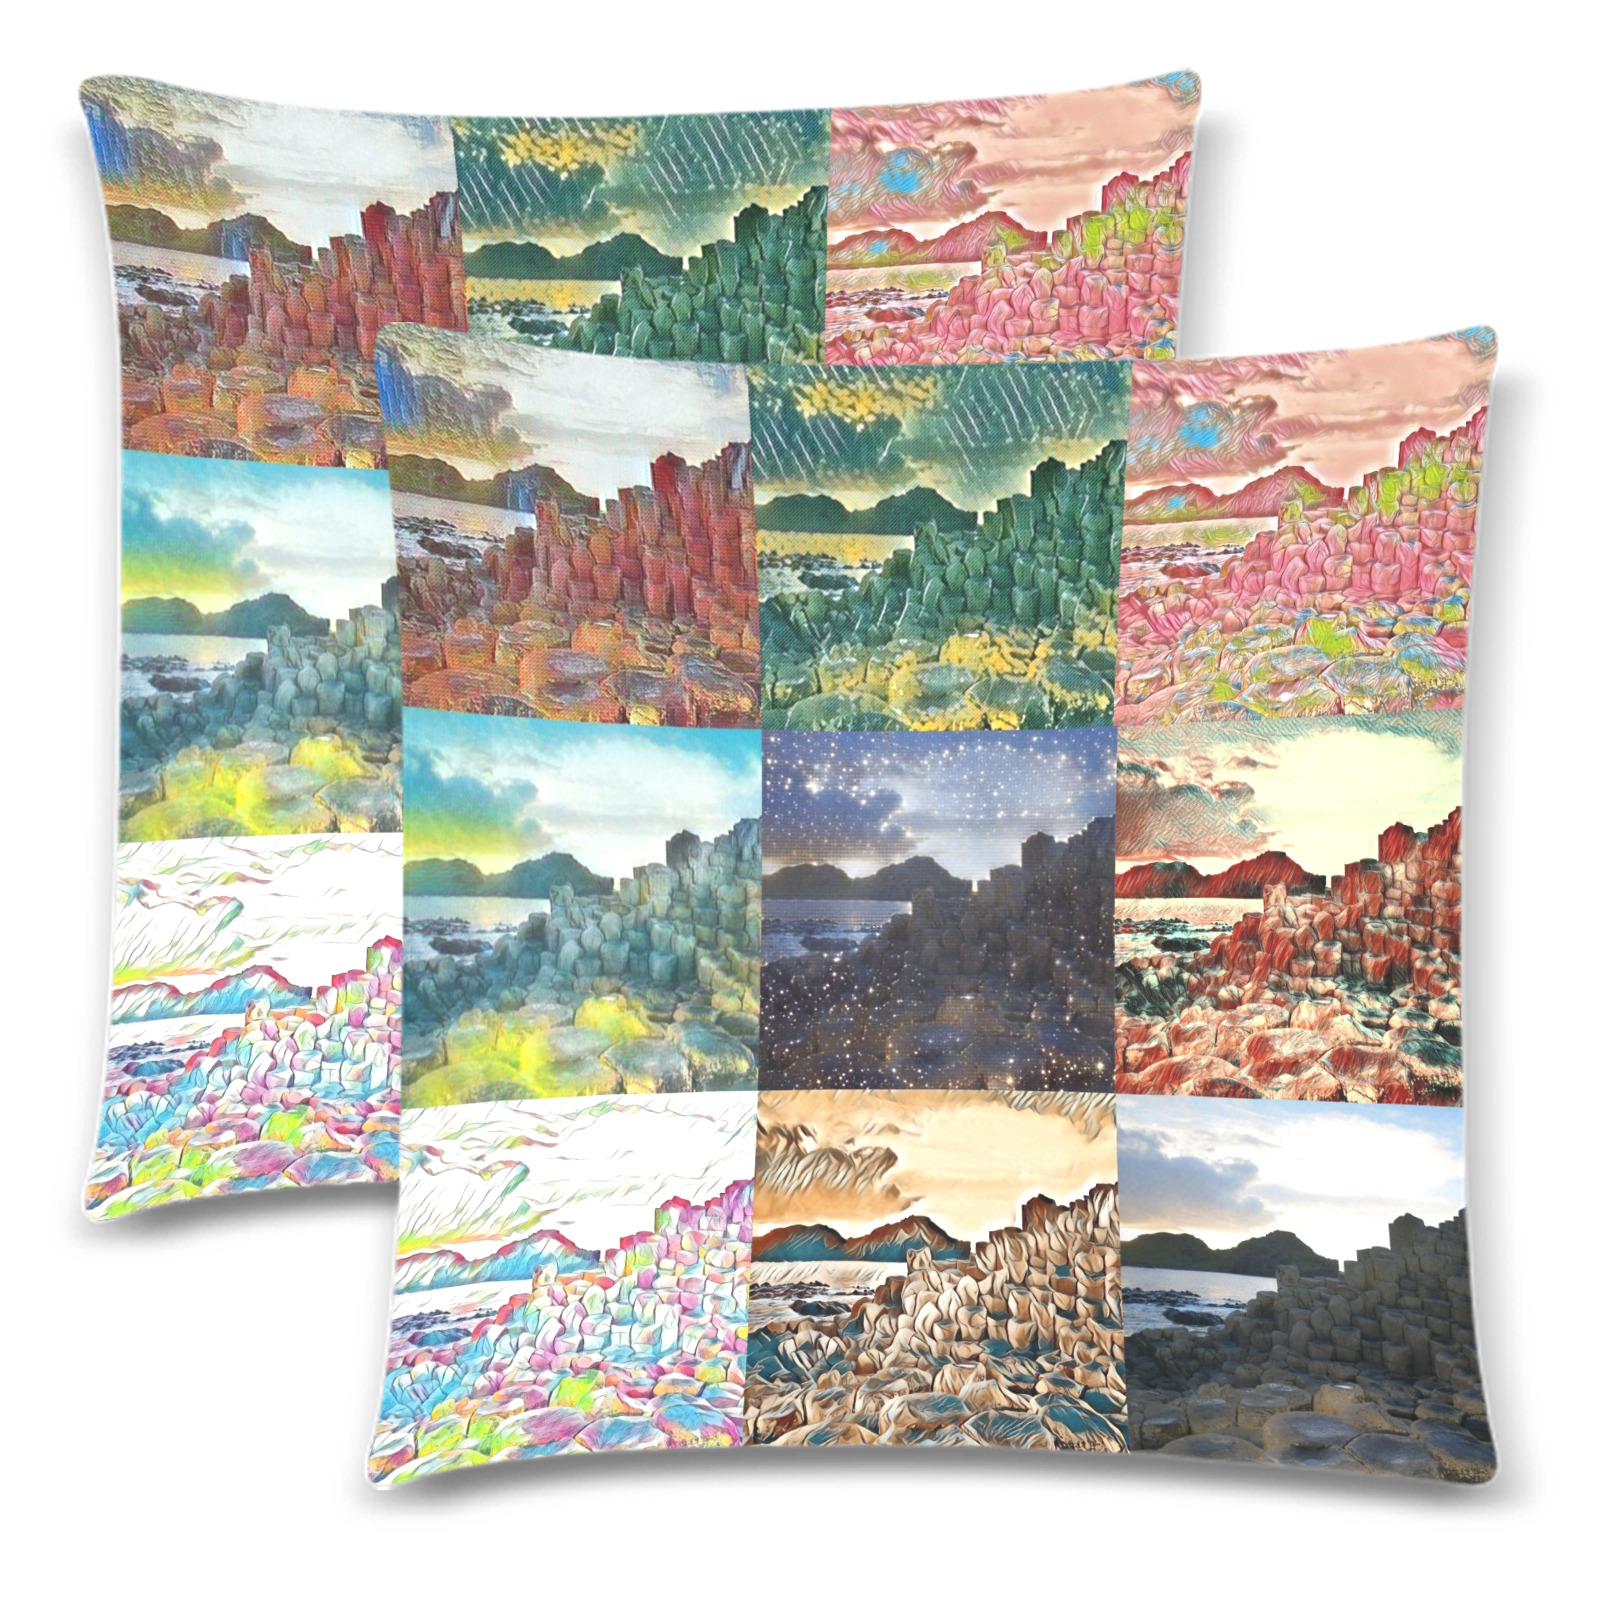 The Giant's Causeway, County Antrim, Northern Ireland Collage Custom Zippered Pillow Cases 18"x 18" (Twin Sides) (Set of 2)